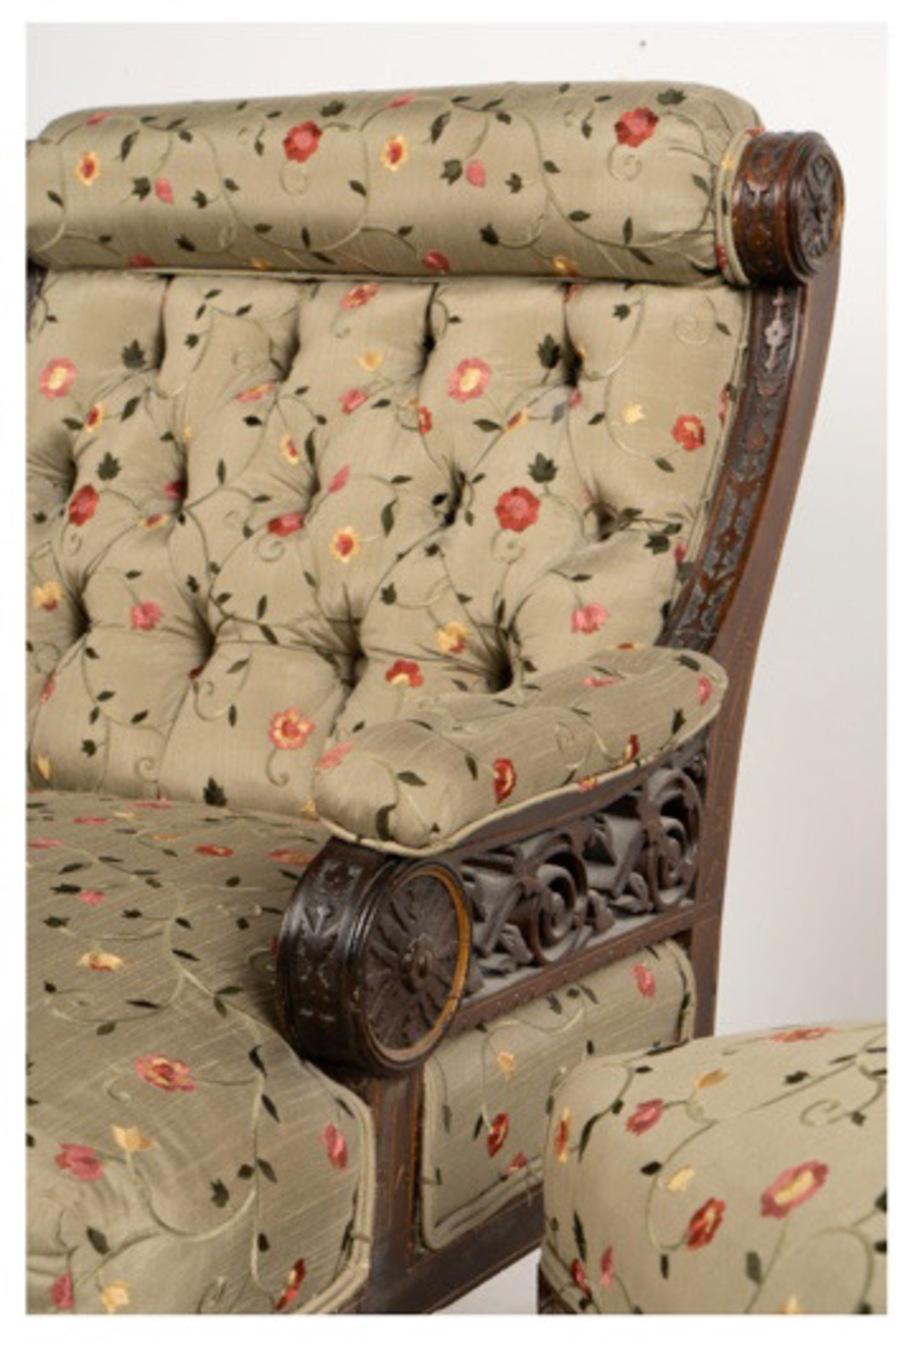 This is a striking pair of American Aesthetic Movement Parlor or Club Chairs in the style of Herter Brothers. These chairs are an unusual form of New York 19th century chair and are crafted of intricately carved rosewood with a gothic design